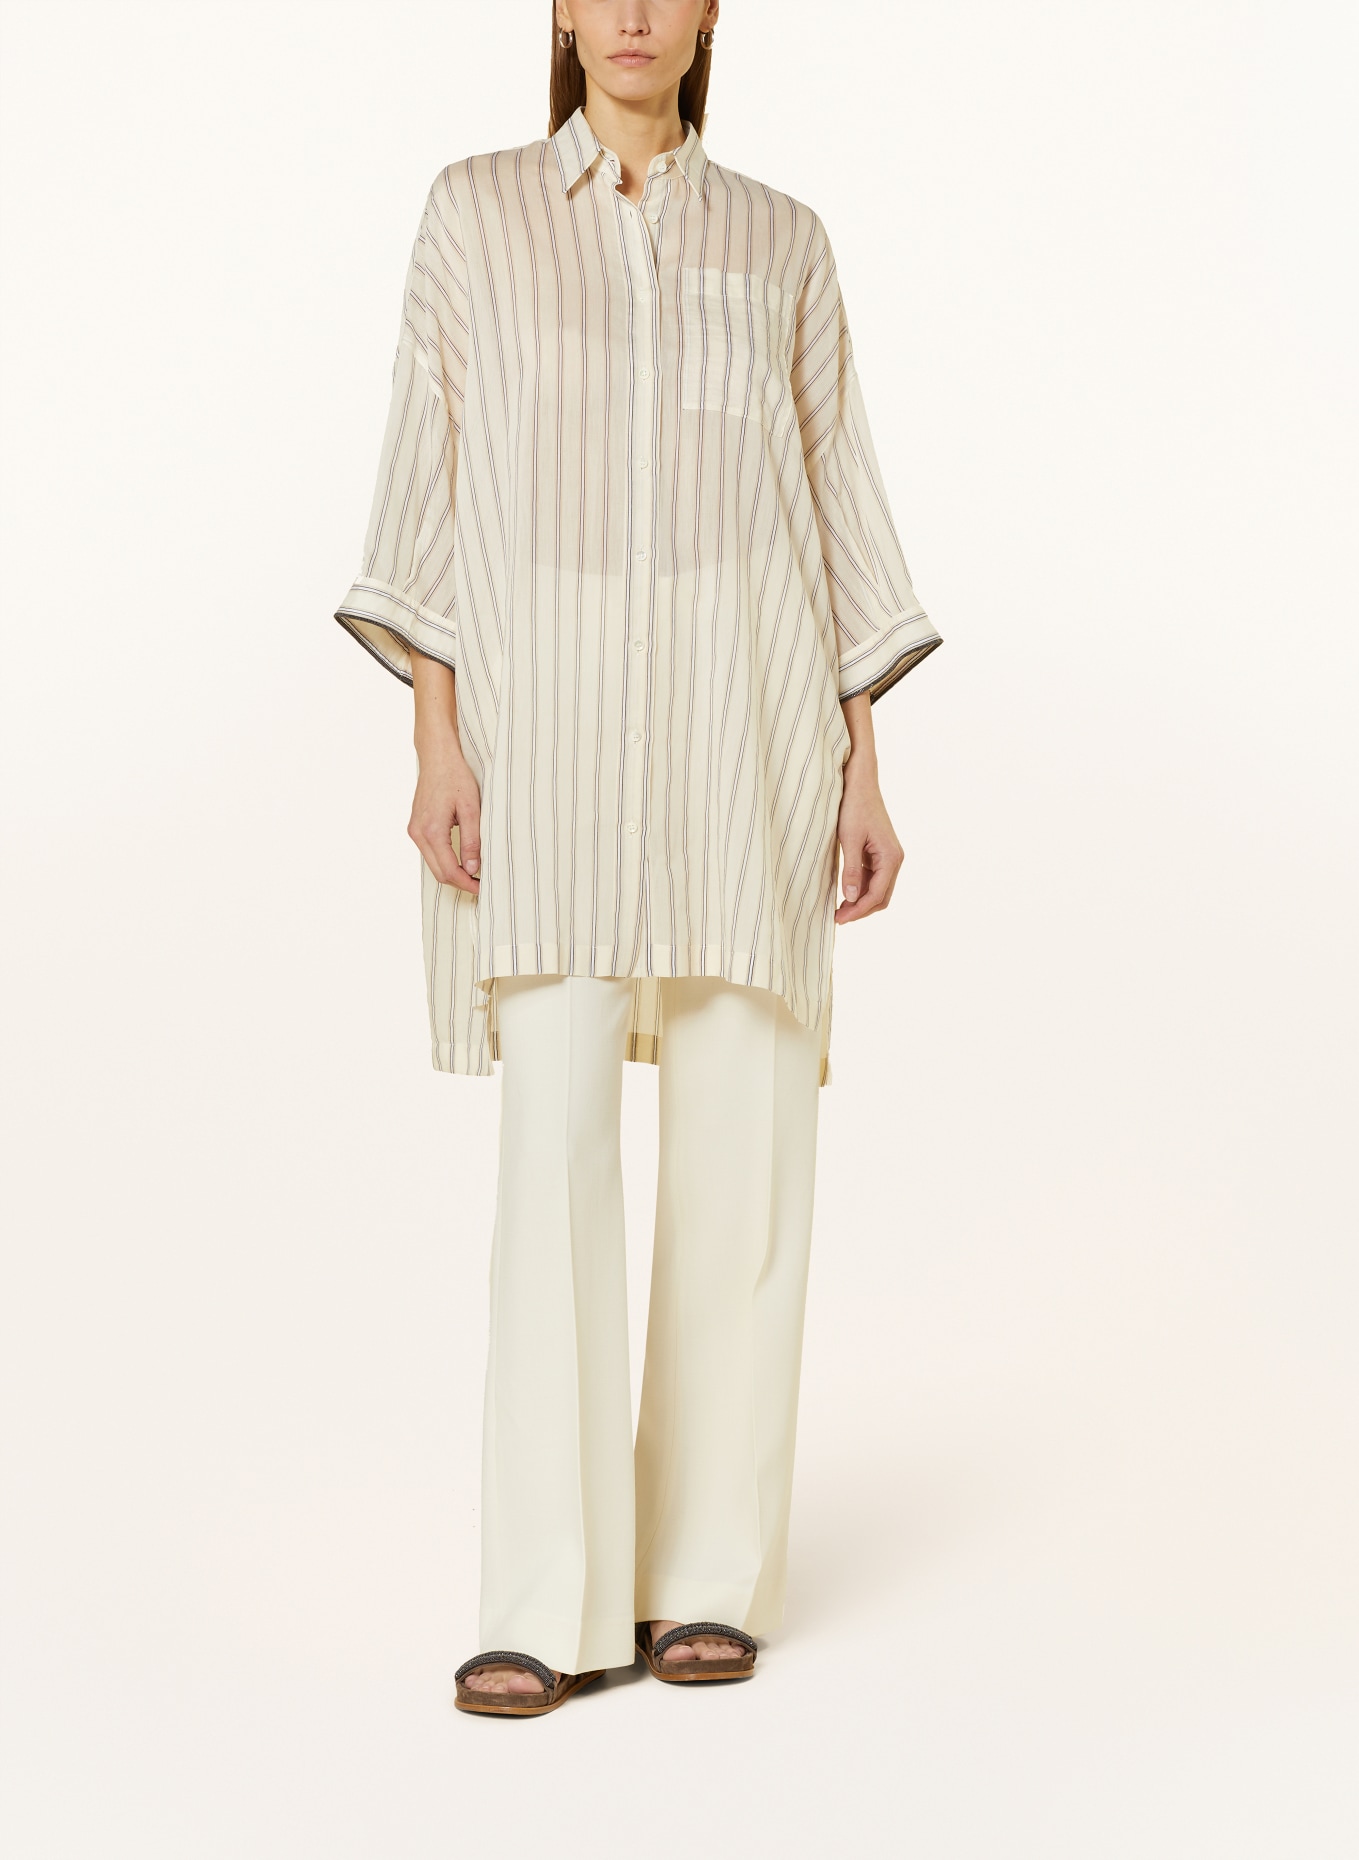 BRUNELLO CUCINELLI Oversized shirt blouse with 3/4 sleeves, Color: LIGHT YELLOW/ BEIGE/ BLACK (Image 2)